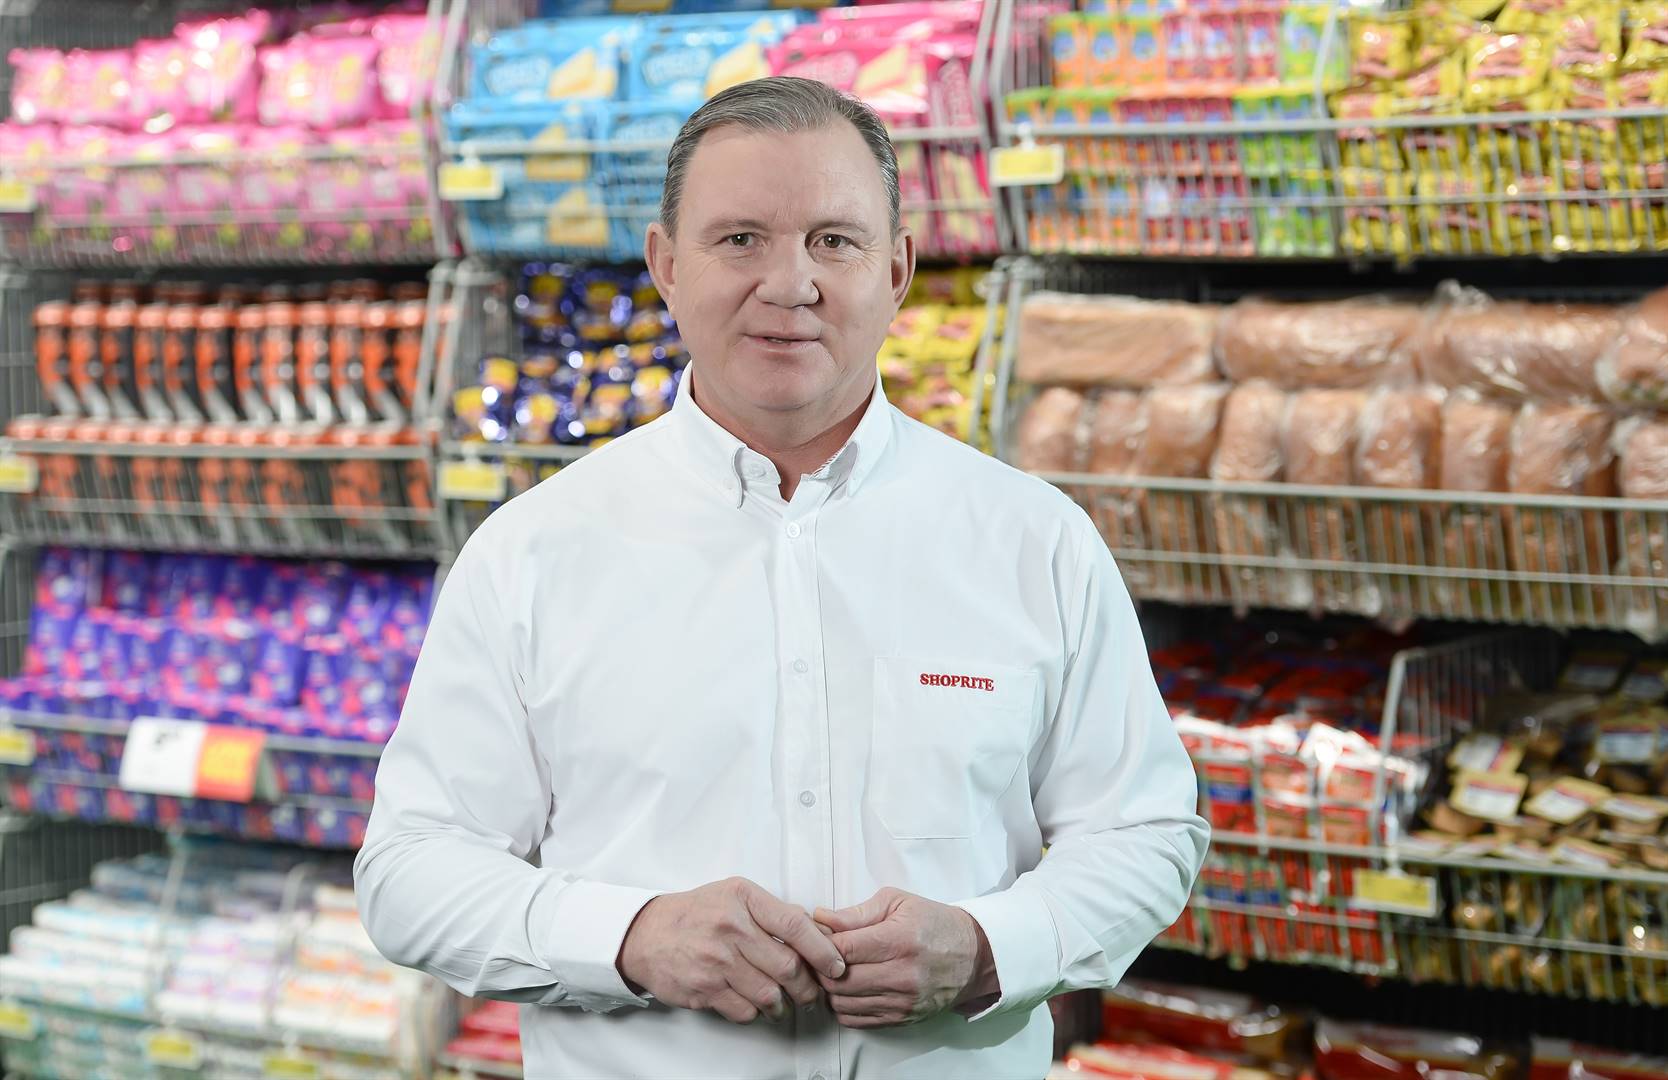 ‘We find them solutions’: Shoprite says it’s using AI to help keep prices low for the poor